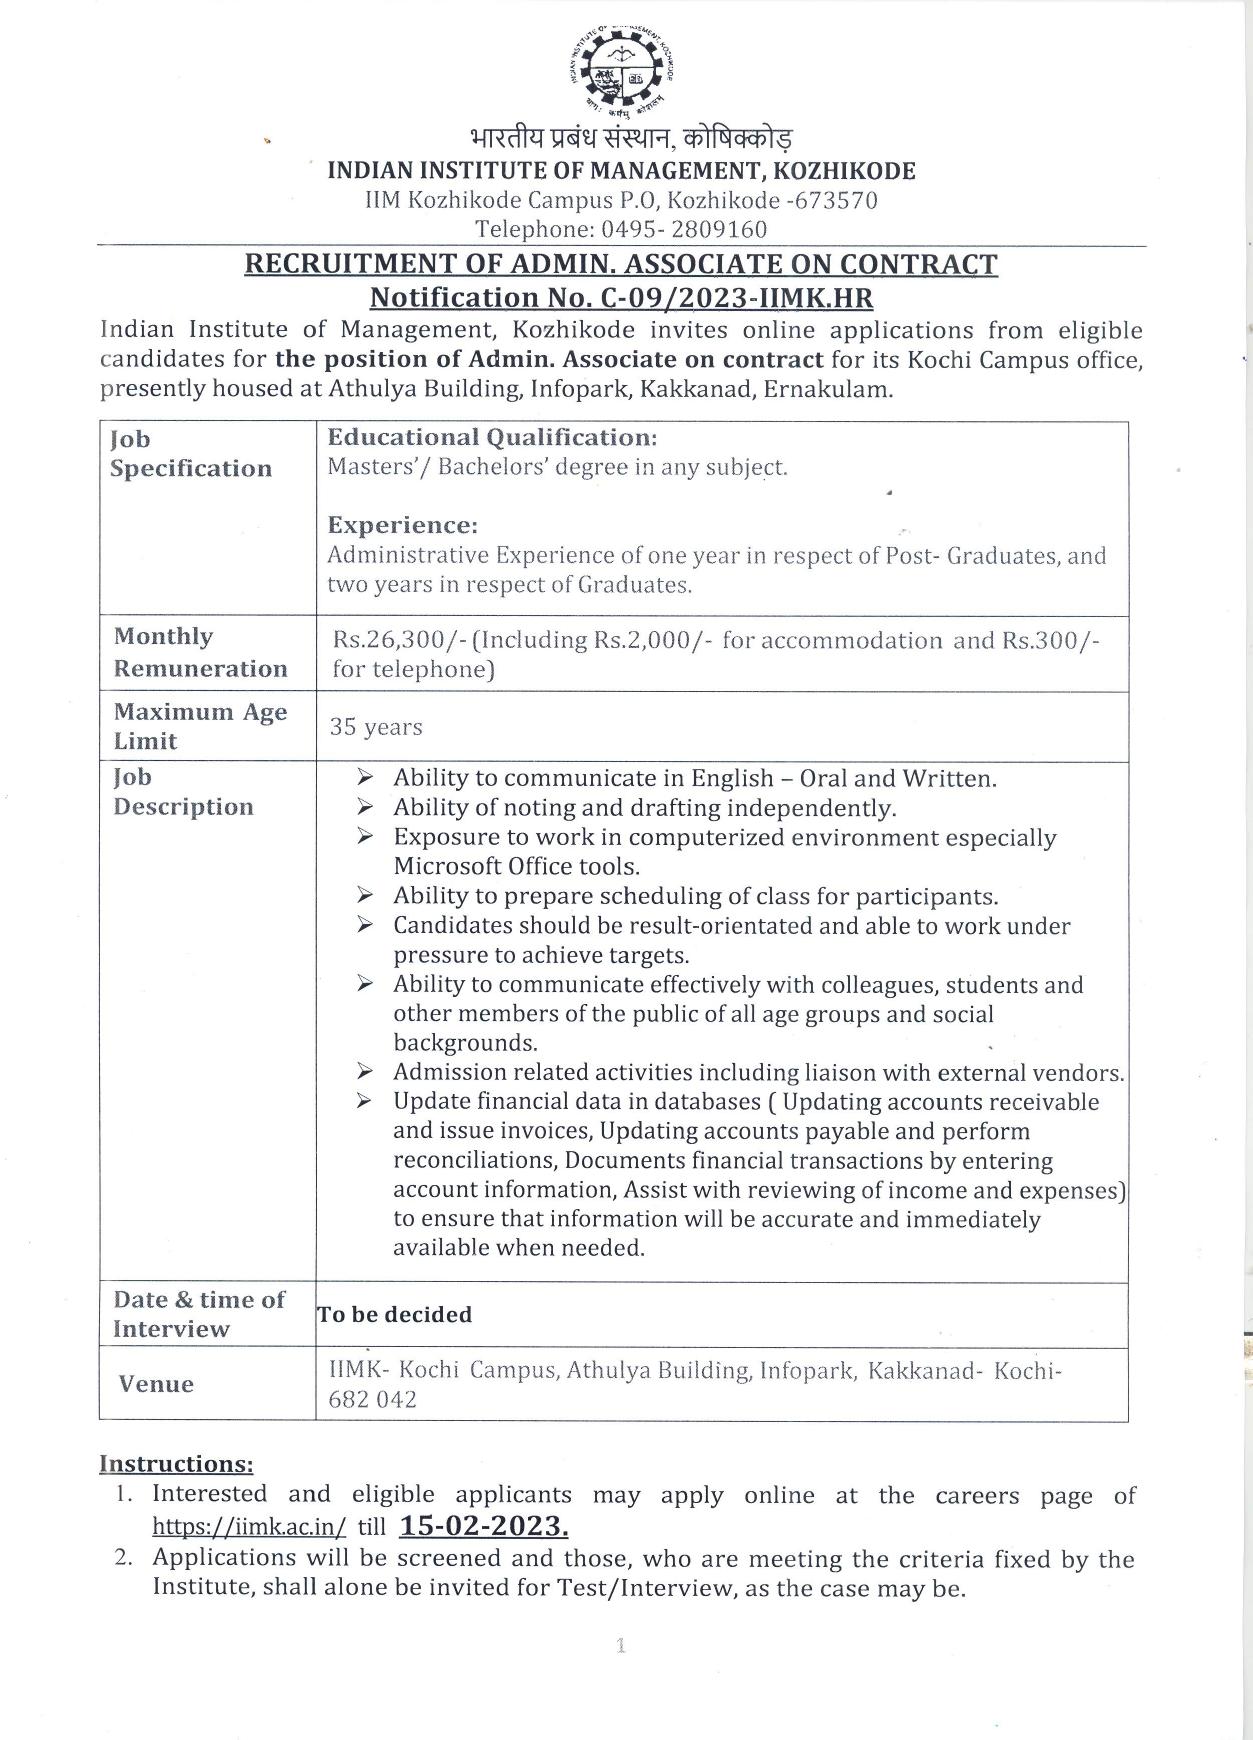 Indian Institute of Management Kozhikode Invites Application for Admin Associate Recruitment 2023 - Page 2